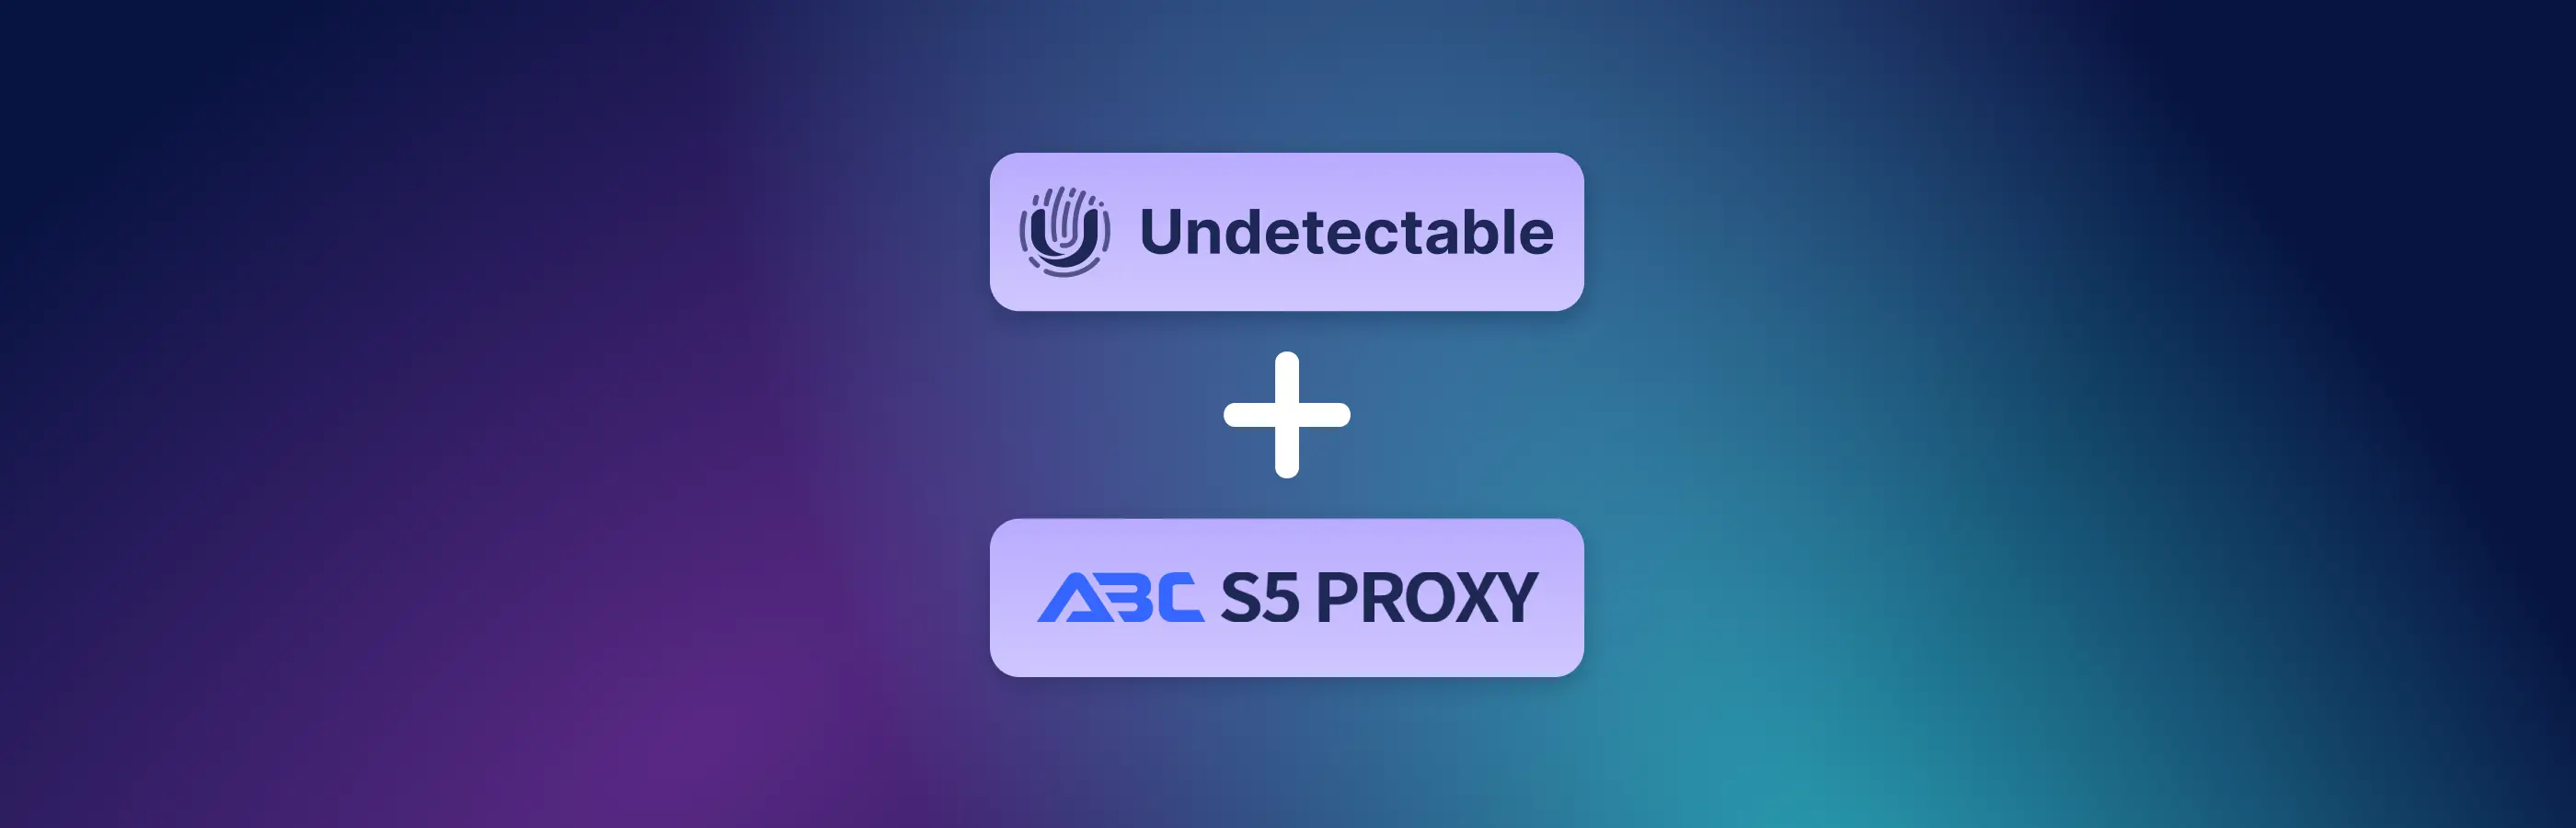  Instructions for connecting ABCProxy to Undetectable